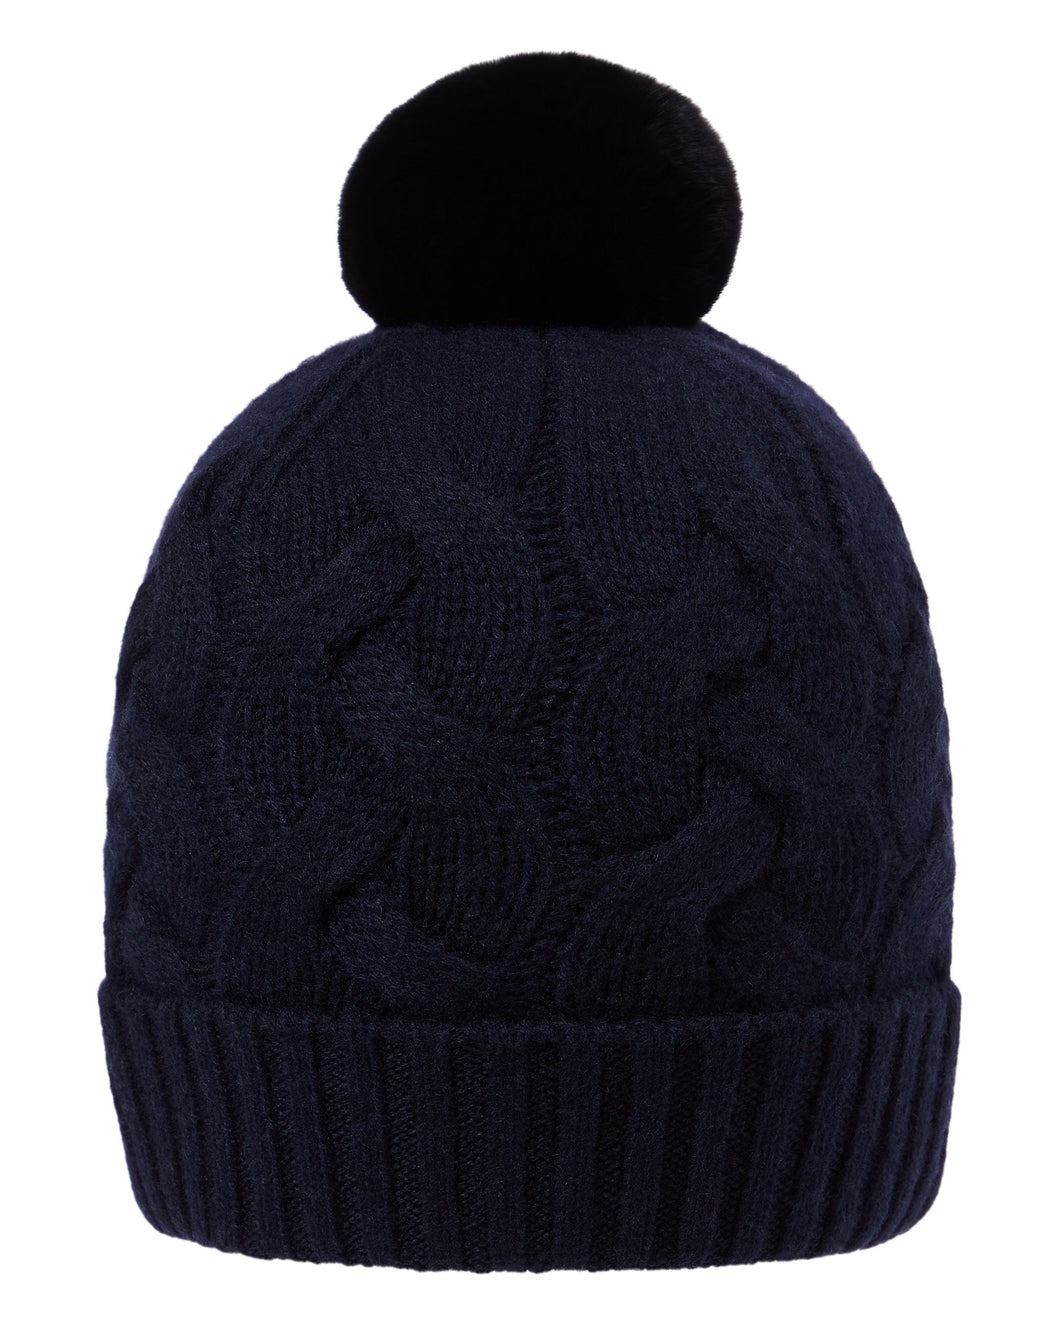 N.Peal Women's Cable Fur Pom Hat Navy Blue